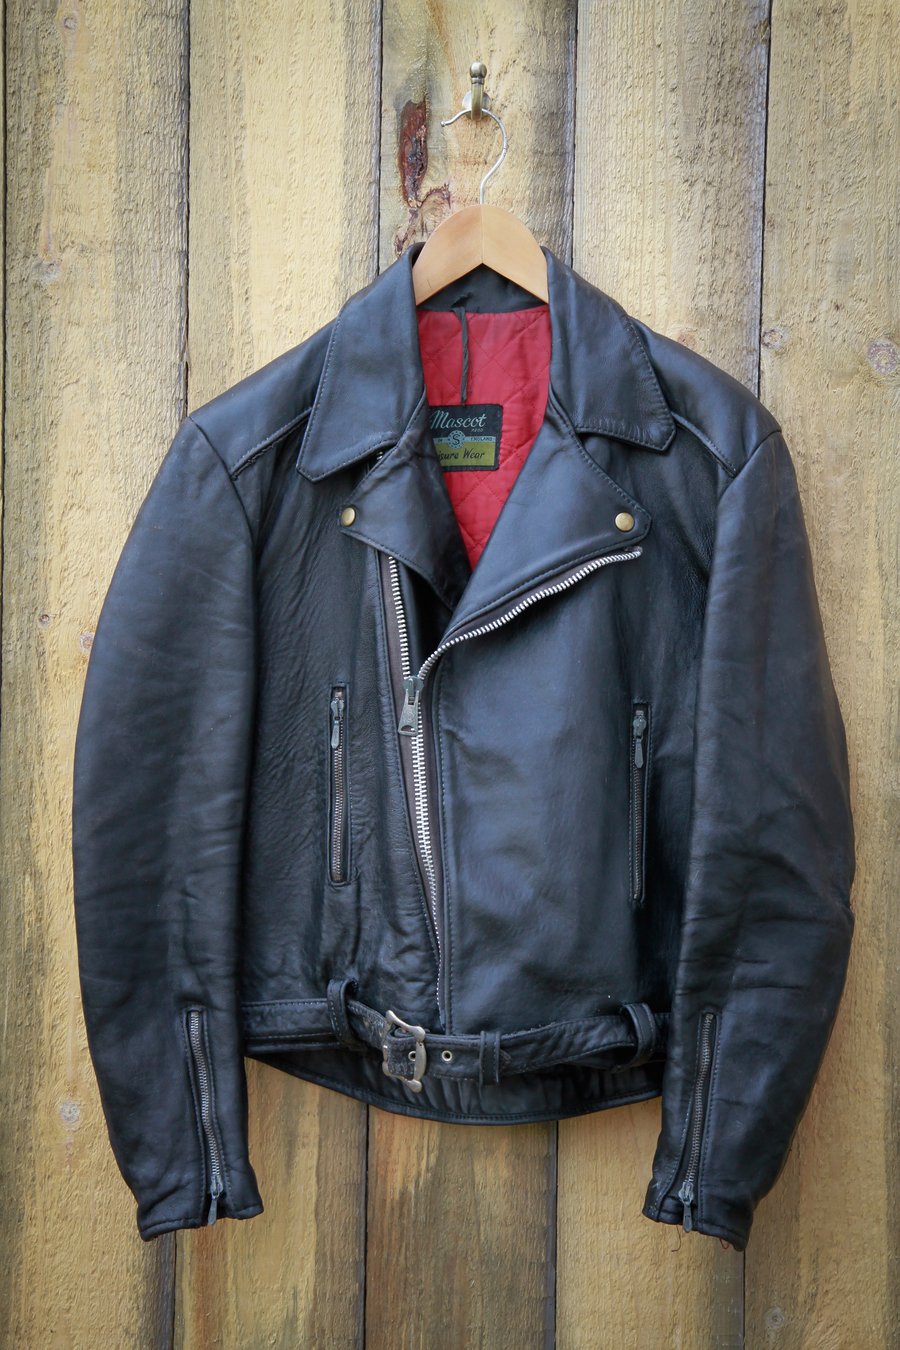 Image of Vintage Mascot Leathers Motorcycle Leather Jacket Size 40 Featuring Painted Back Piece